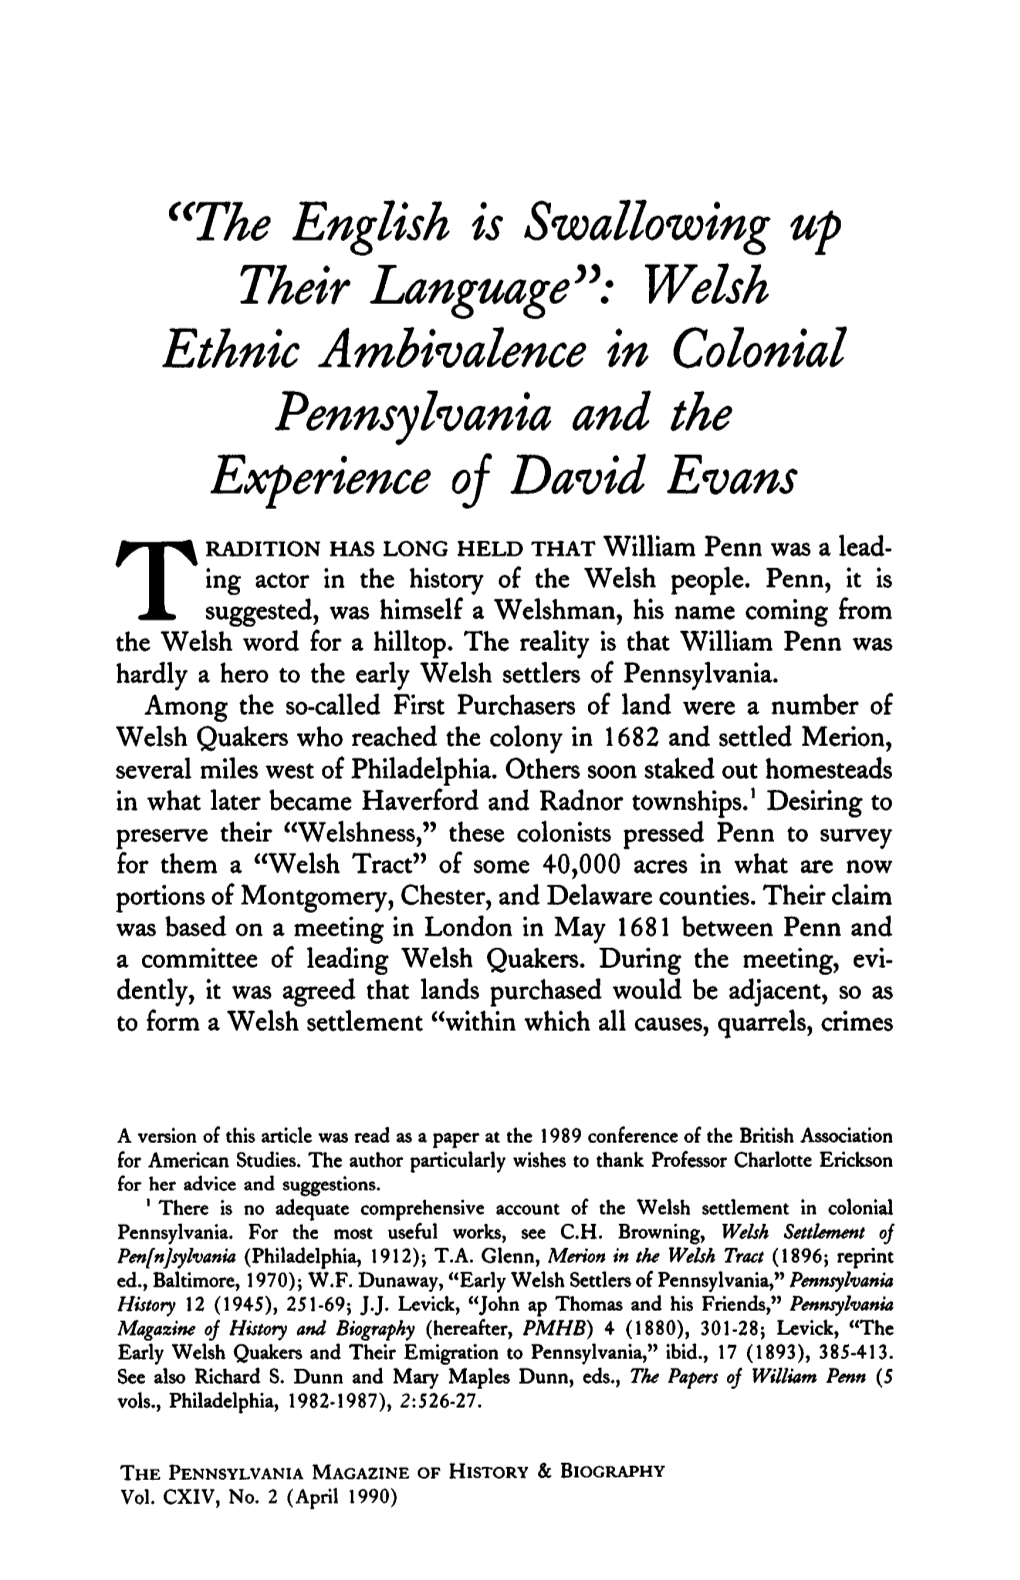 Welsh Ethnic Ambivalence in Colonial Pennsylvania and the Experience Oj David Evans